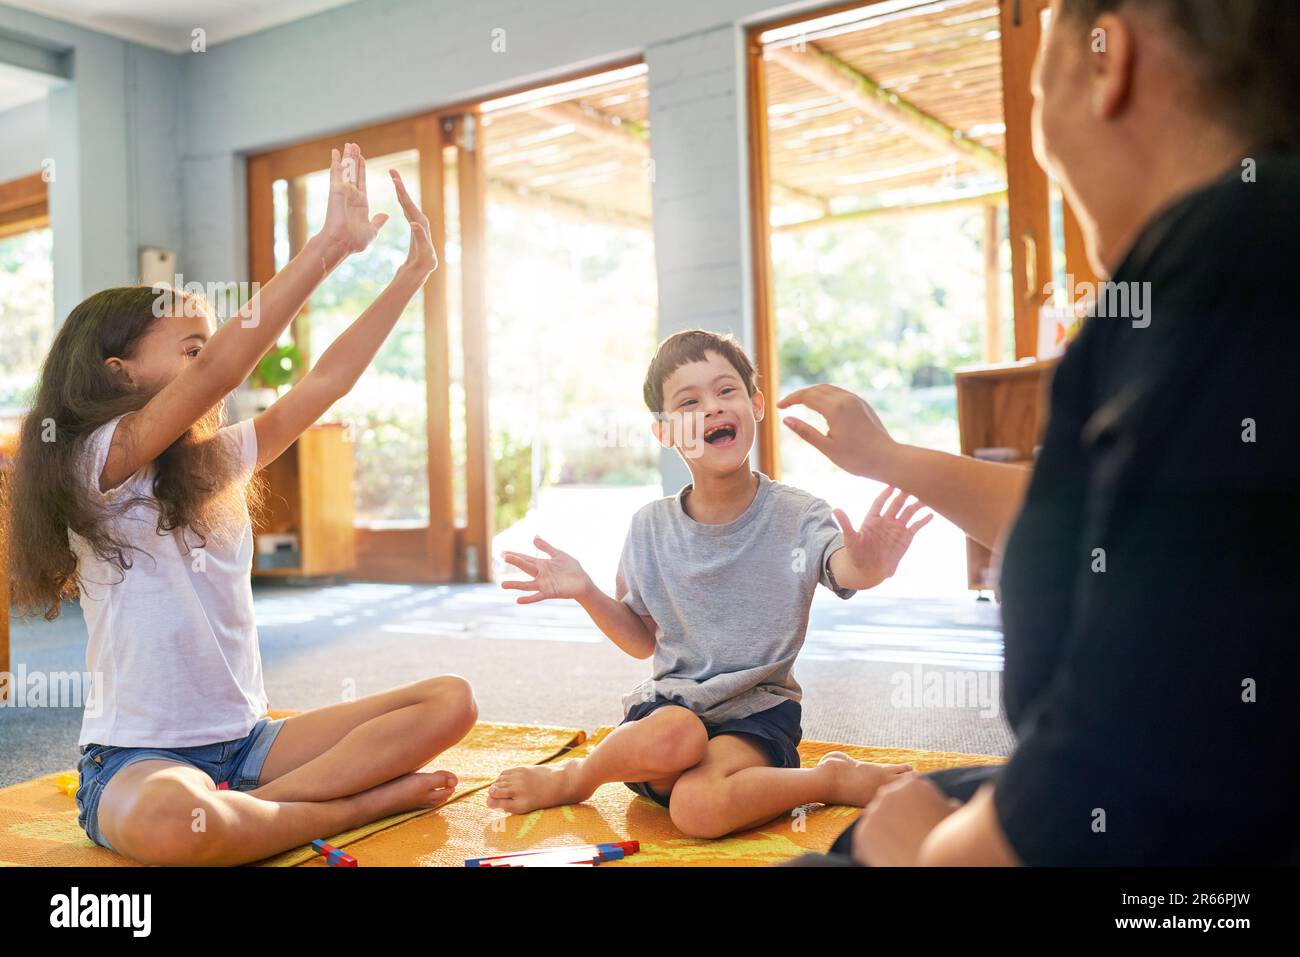 Happy boy with Down Syndrome playing on floor with family Stock Photo